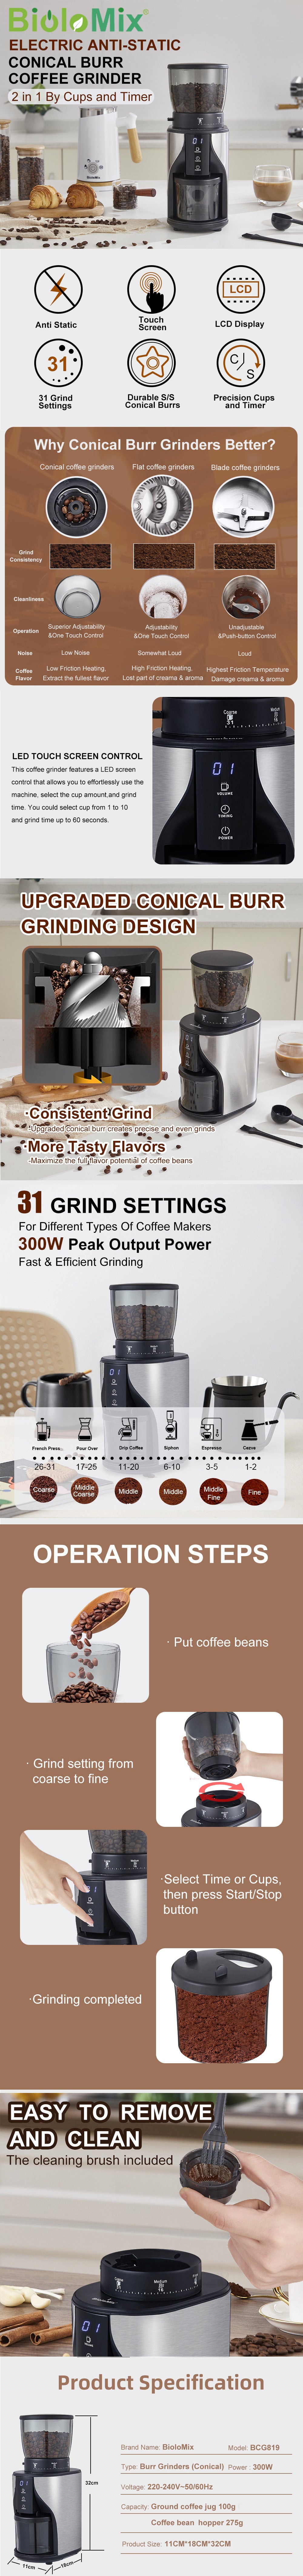 Automatic Coffee Grinder With 31 Grind Settings